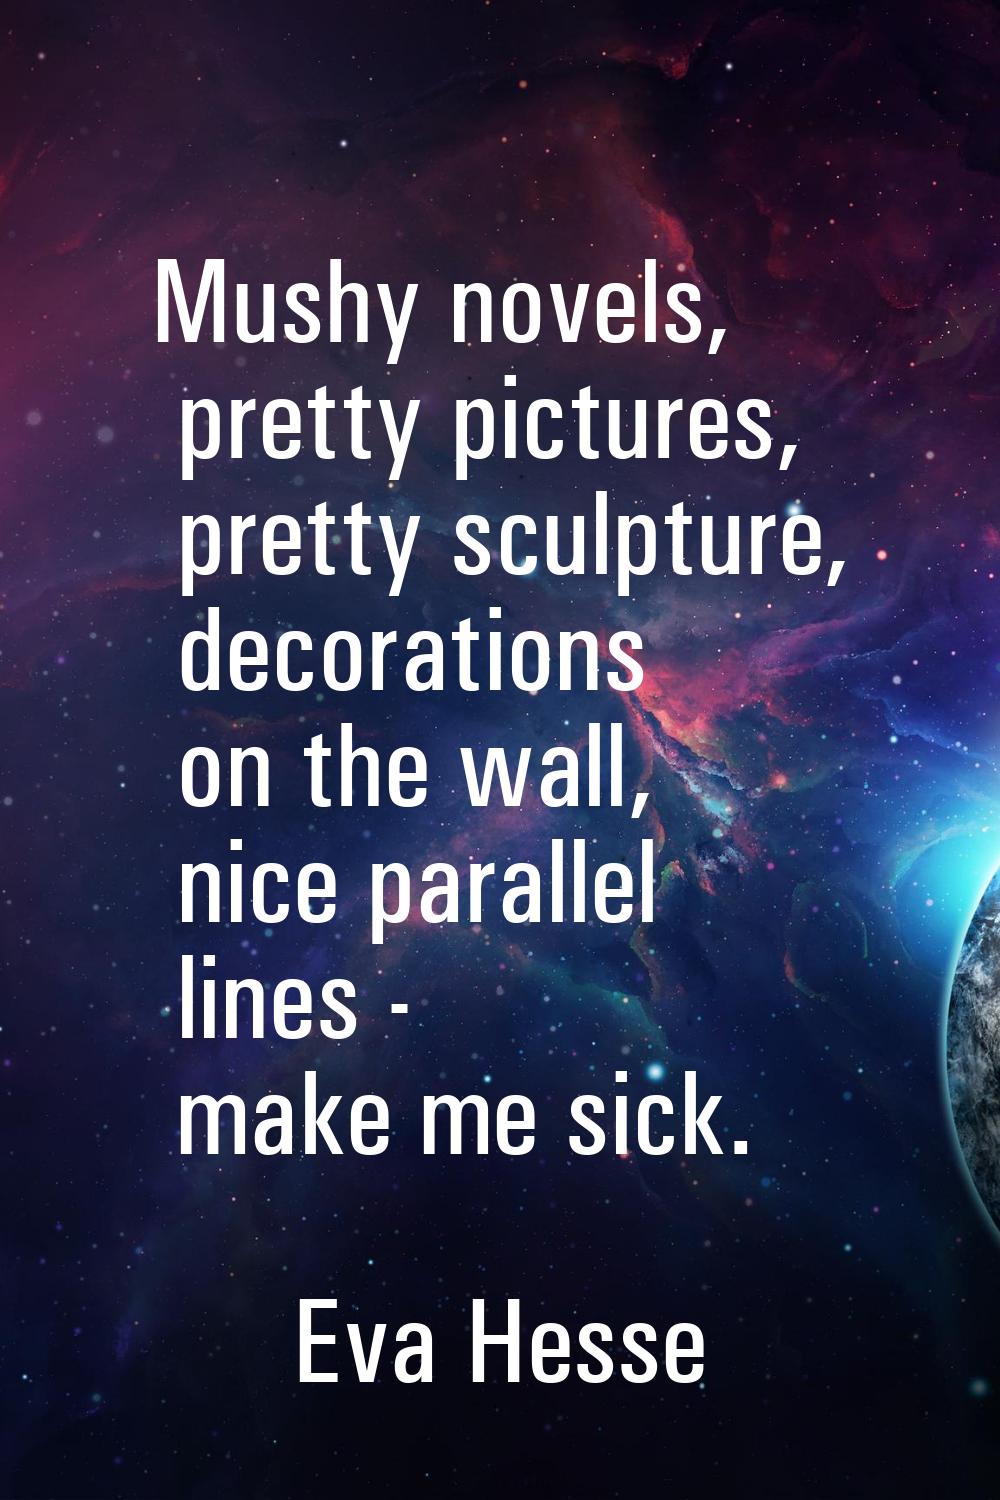 Mushy novels, pretty pictures, pretty sculpture, decorations on the wall, nice parallel lines - mak